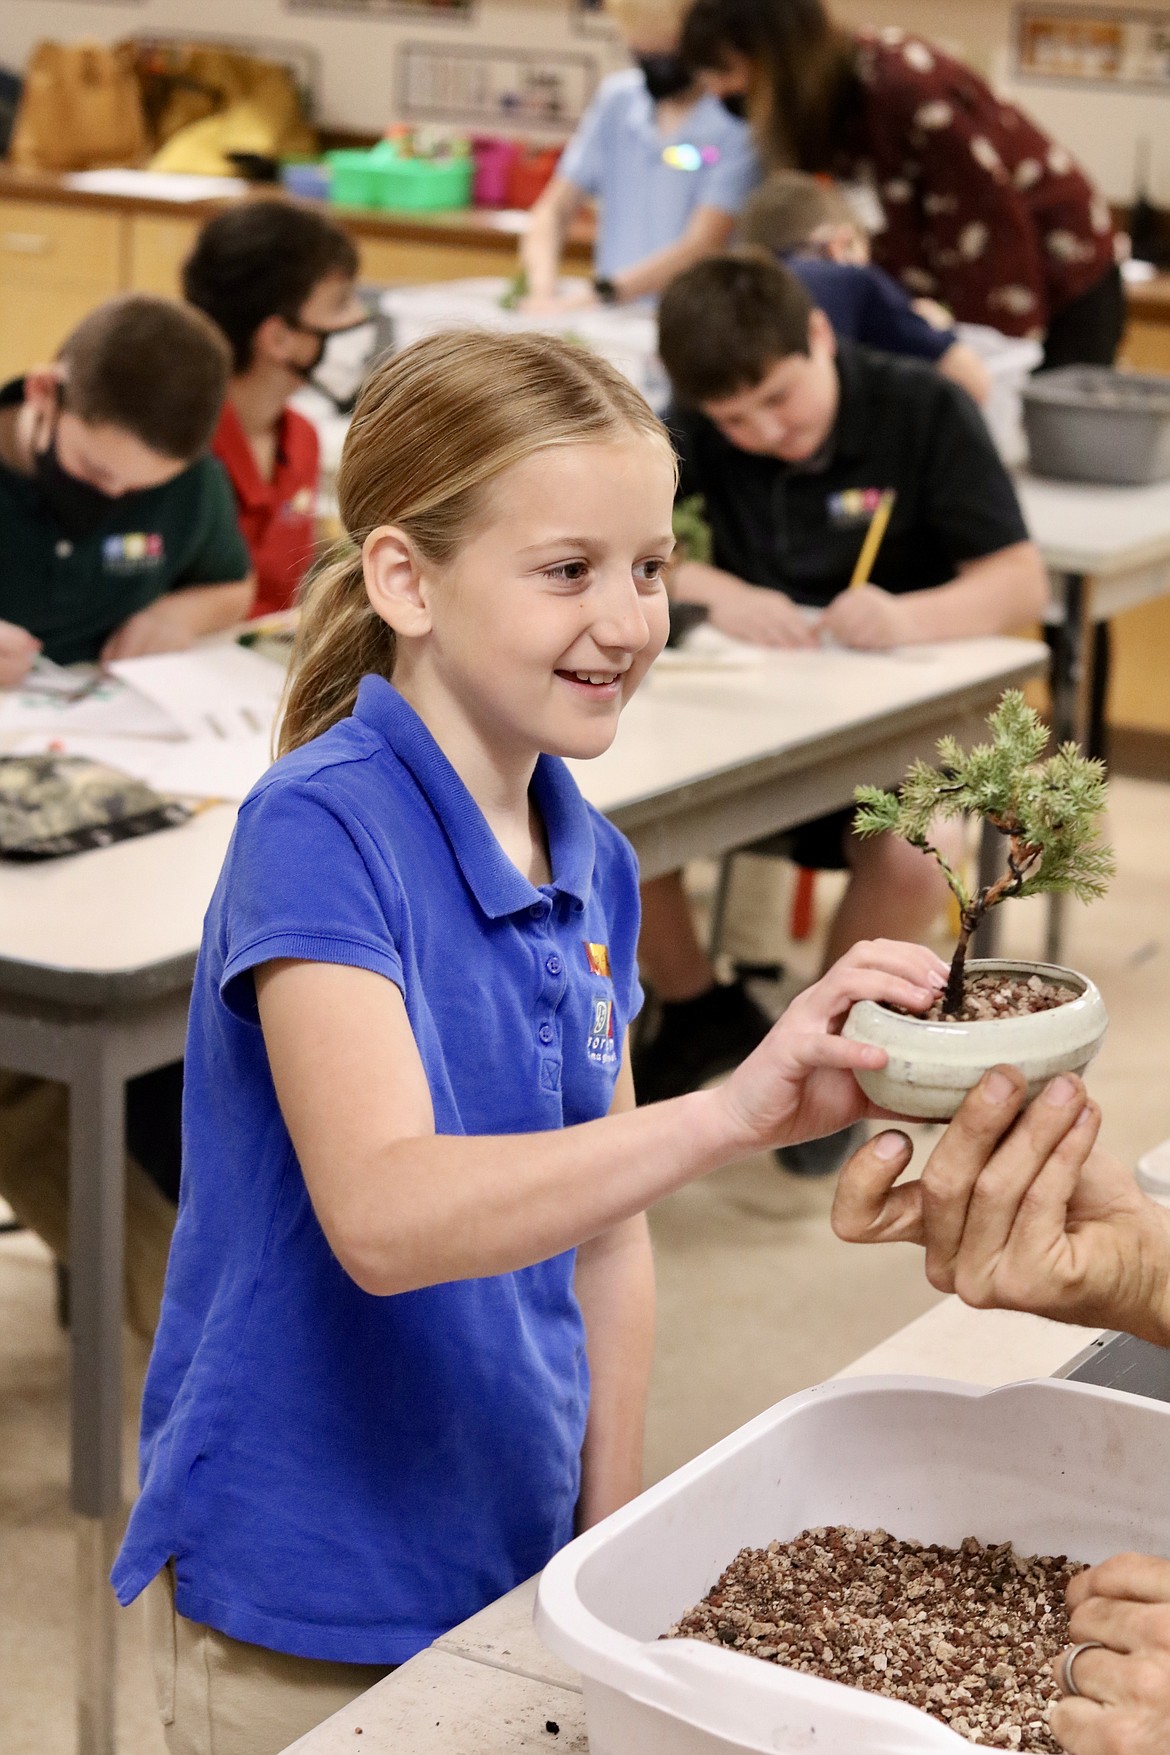 Fifth-grader Miriam Pratt smiles as she takes her newly potted bonsai tree to the next station to apply the rock ground cover on Thursday at Sorensen Magnet School of the Arts and Humanities in Coeur d’Alene. HANNAH NEFF/Press